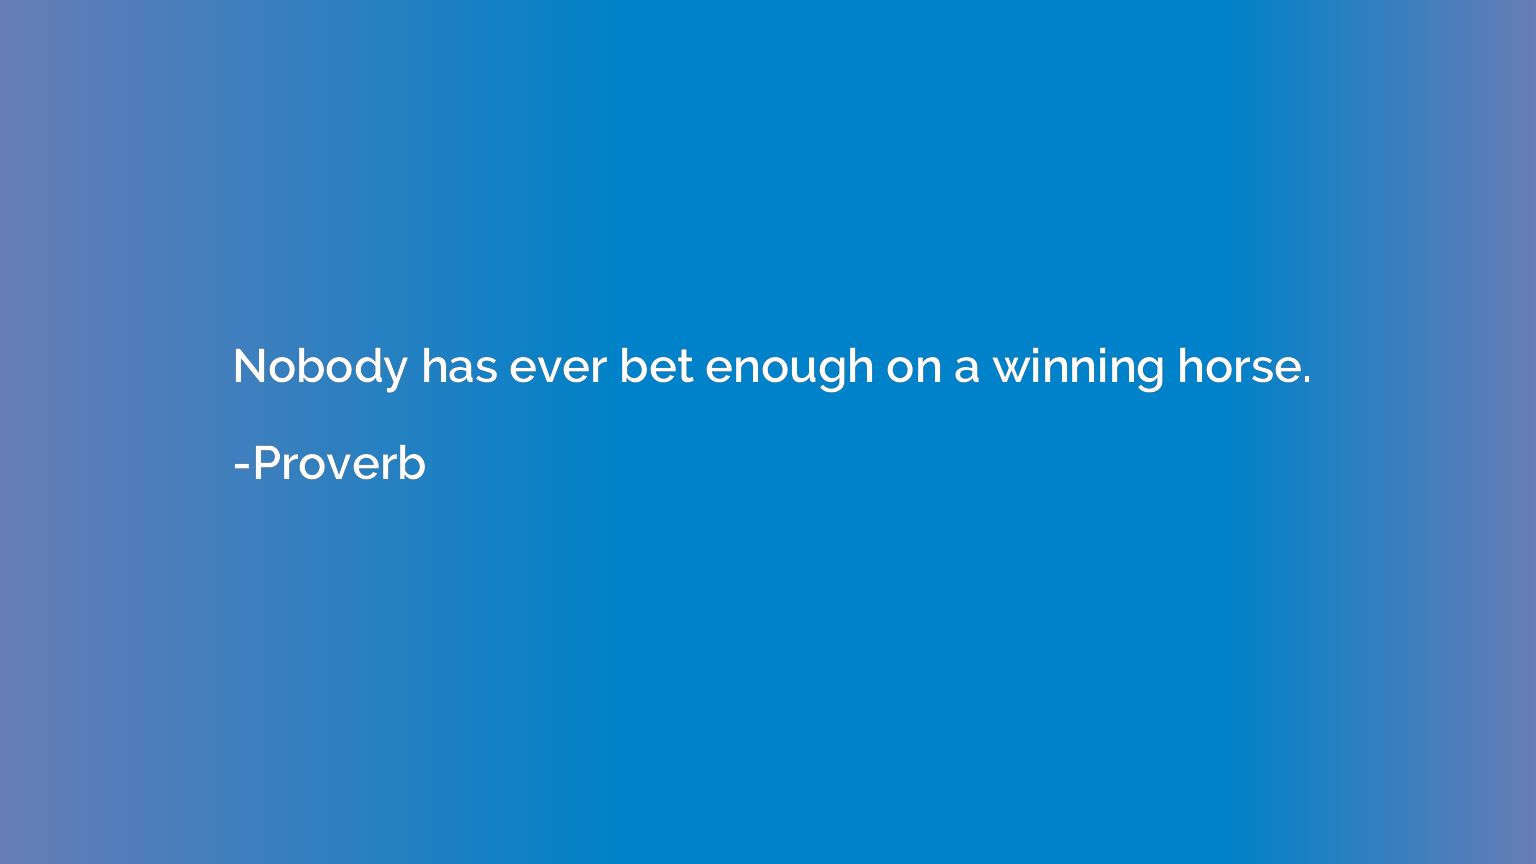 Nobody has ever bet enough on a winning horse.